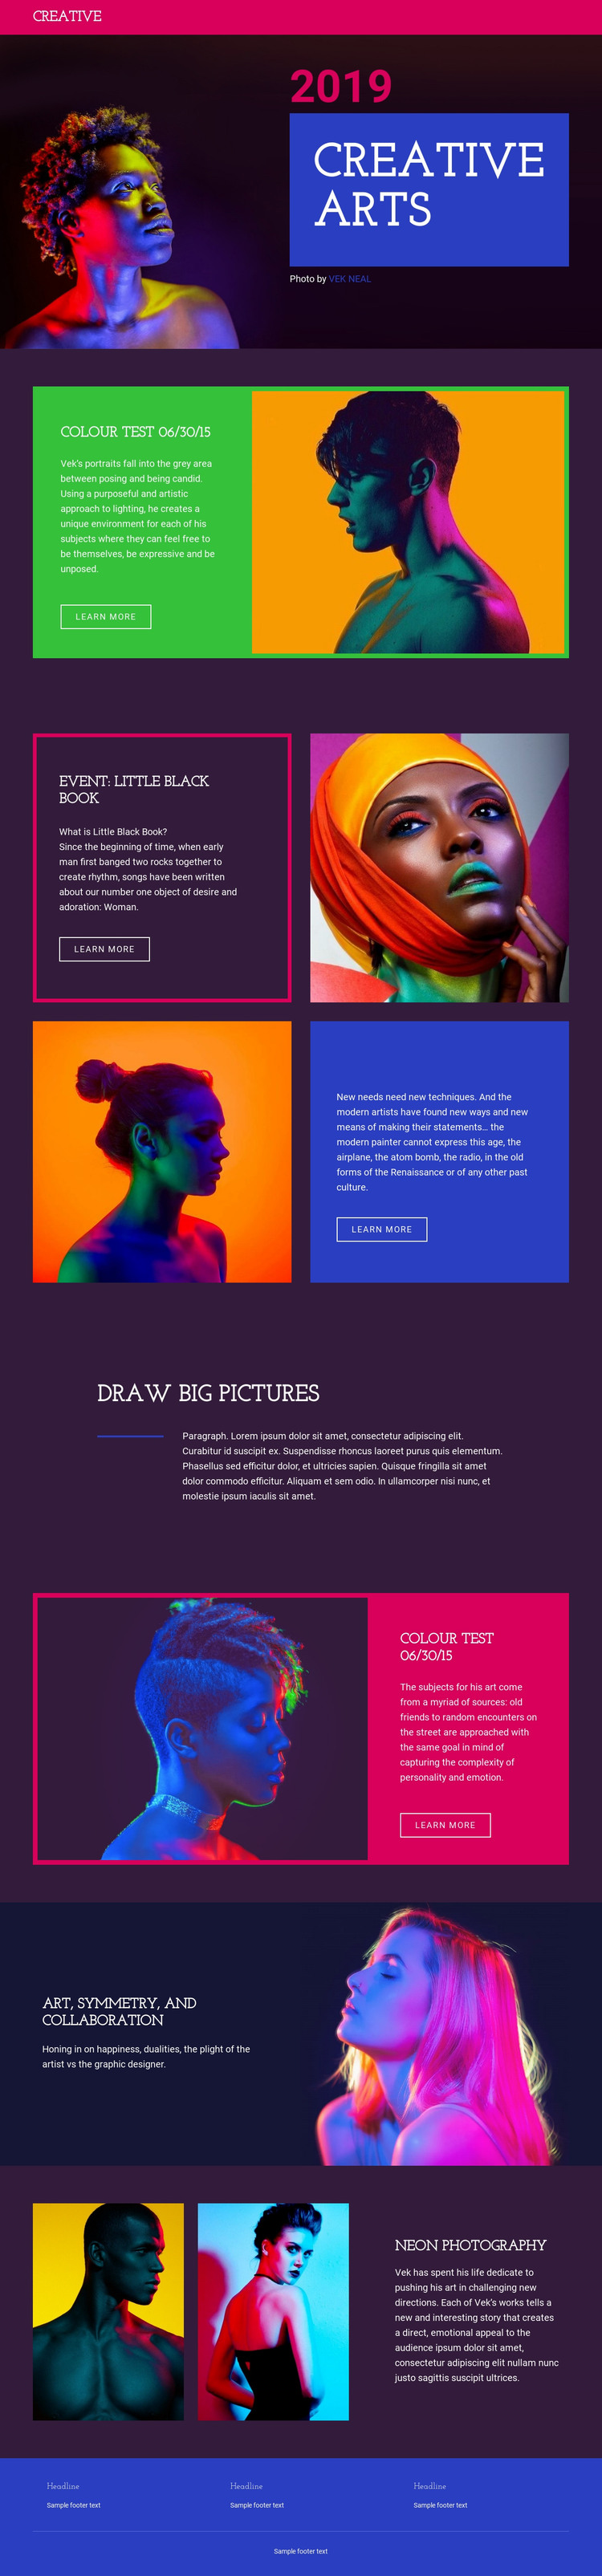 Limited-edition photography Homepage Design